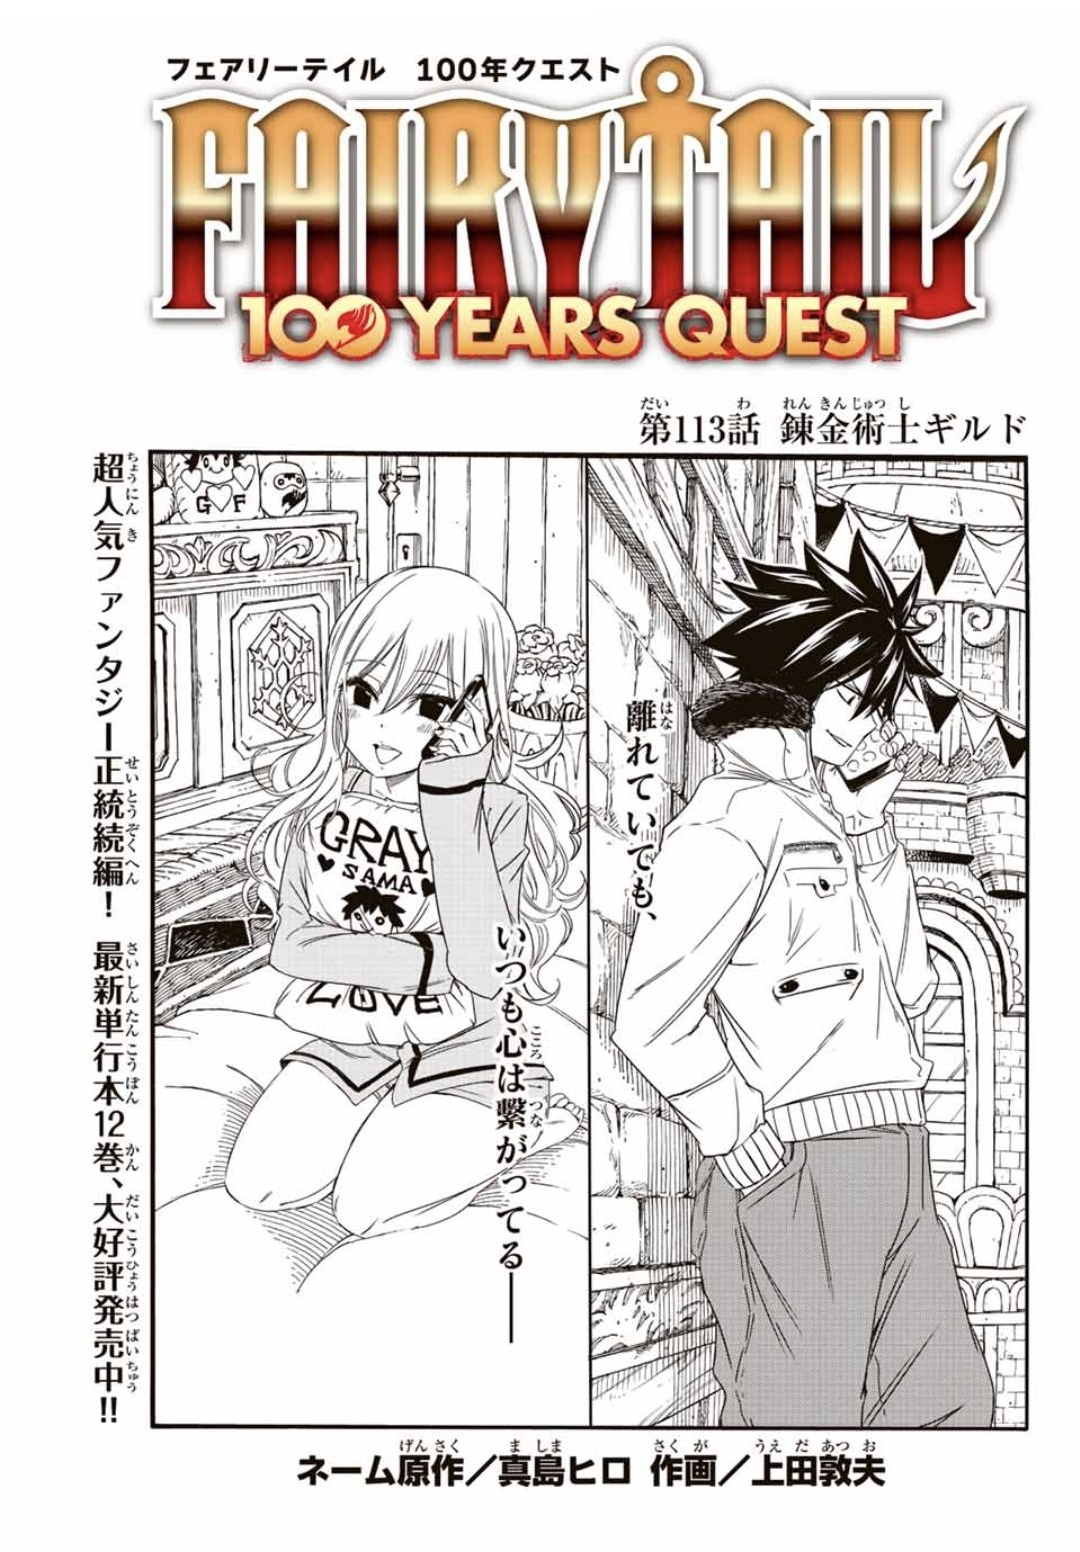 FAIRY TAIL: 100 Years Quest 14 Paperback – 2023 by Hiro Mashima